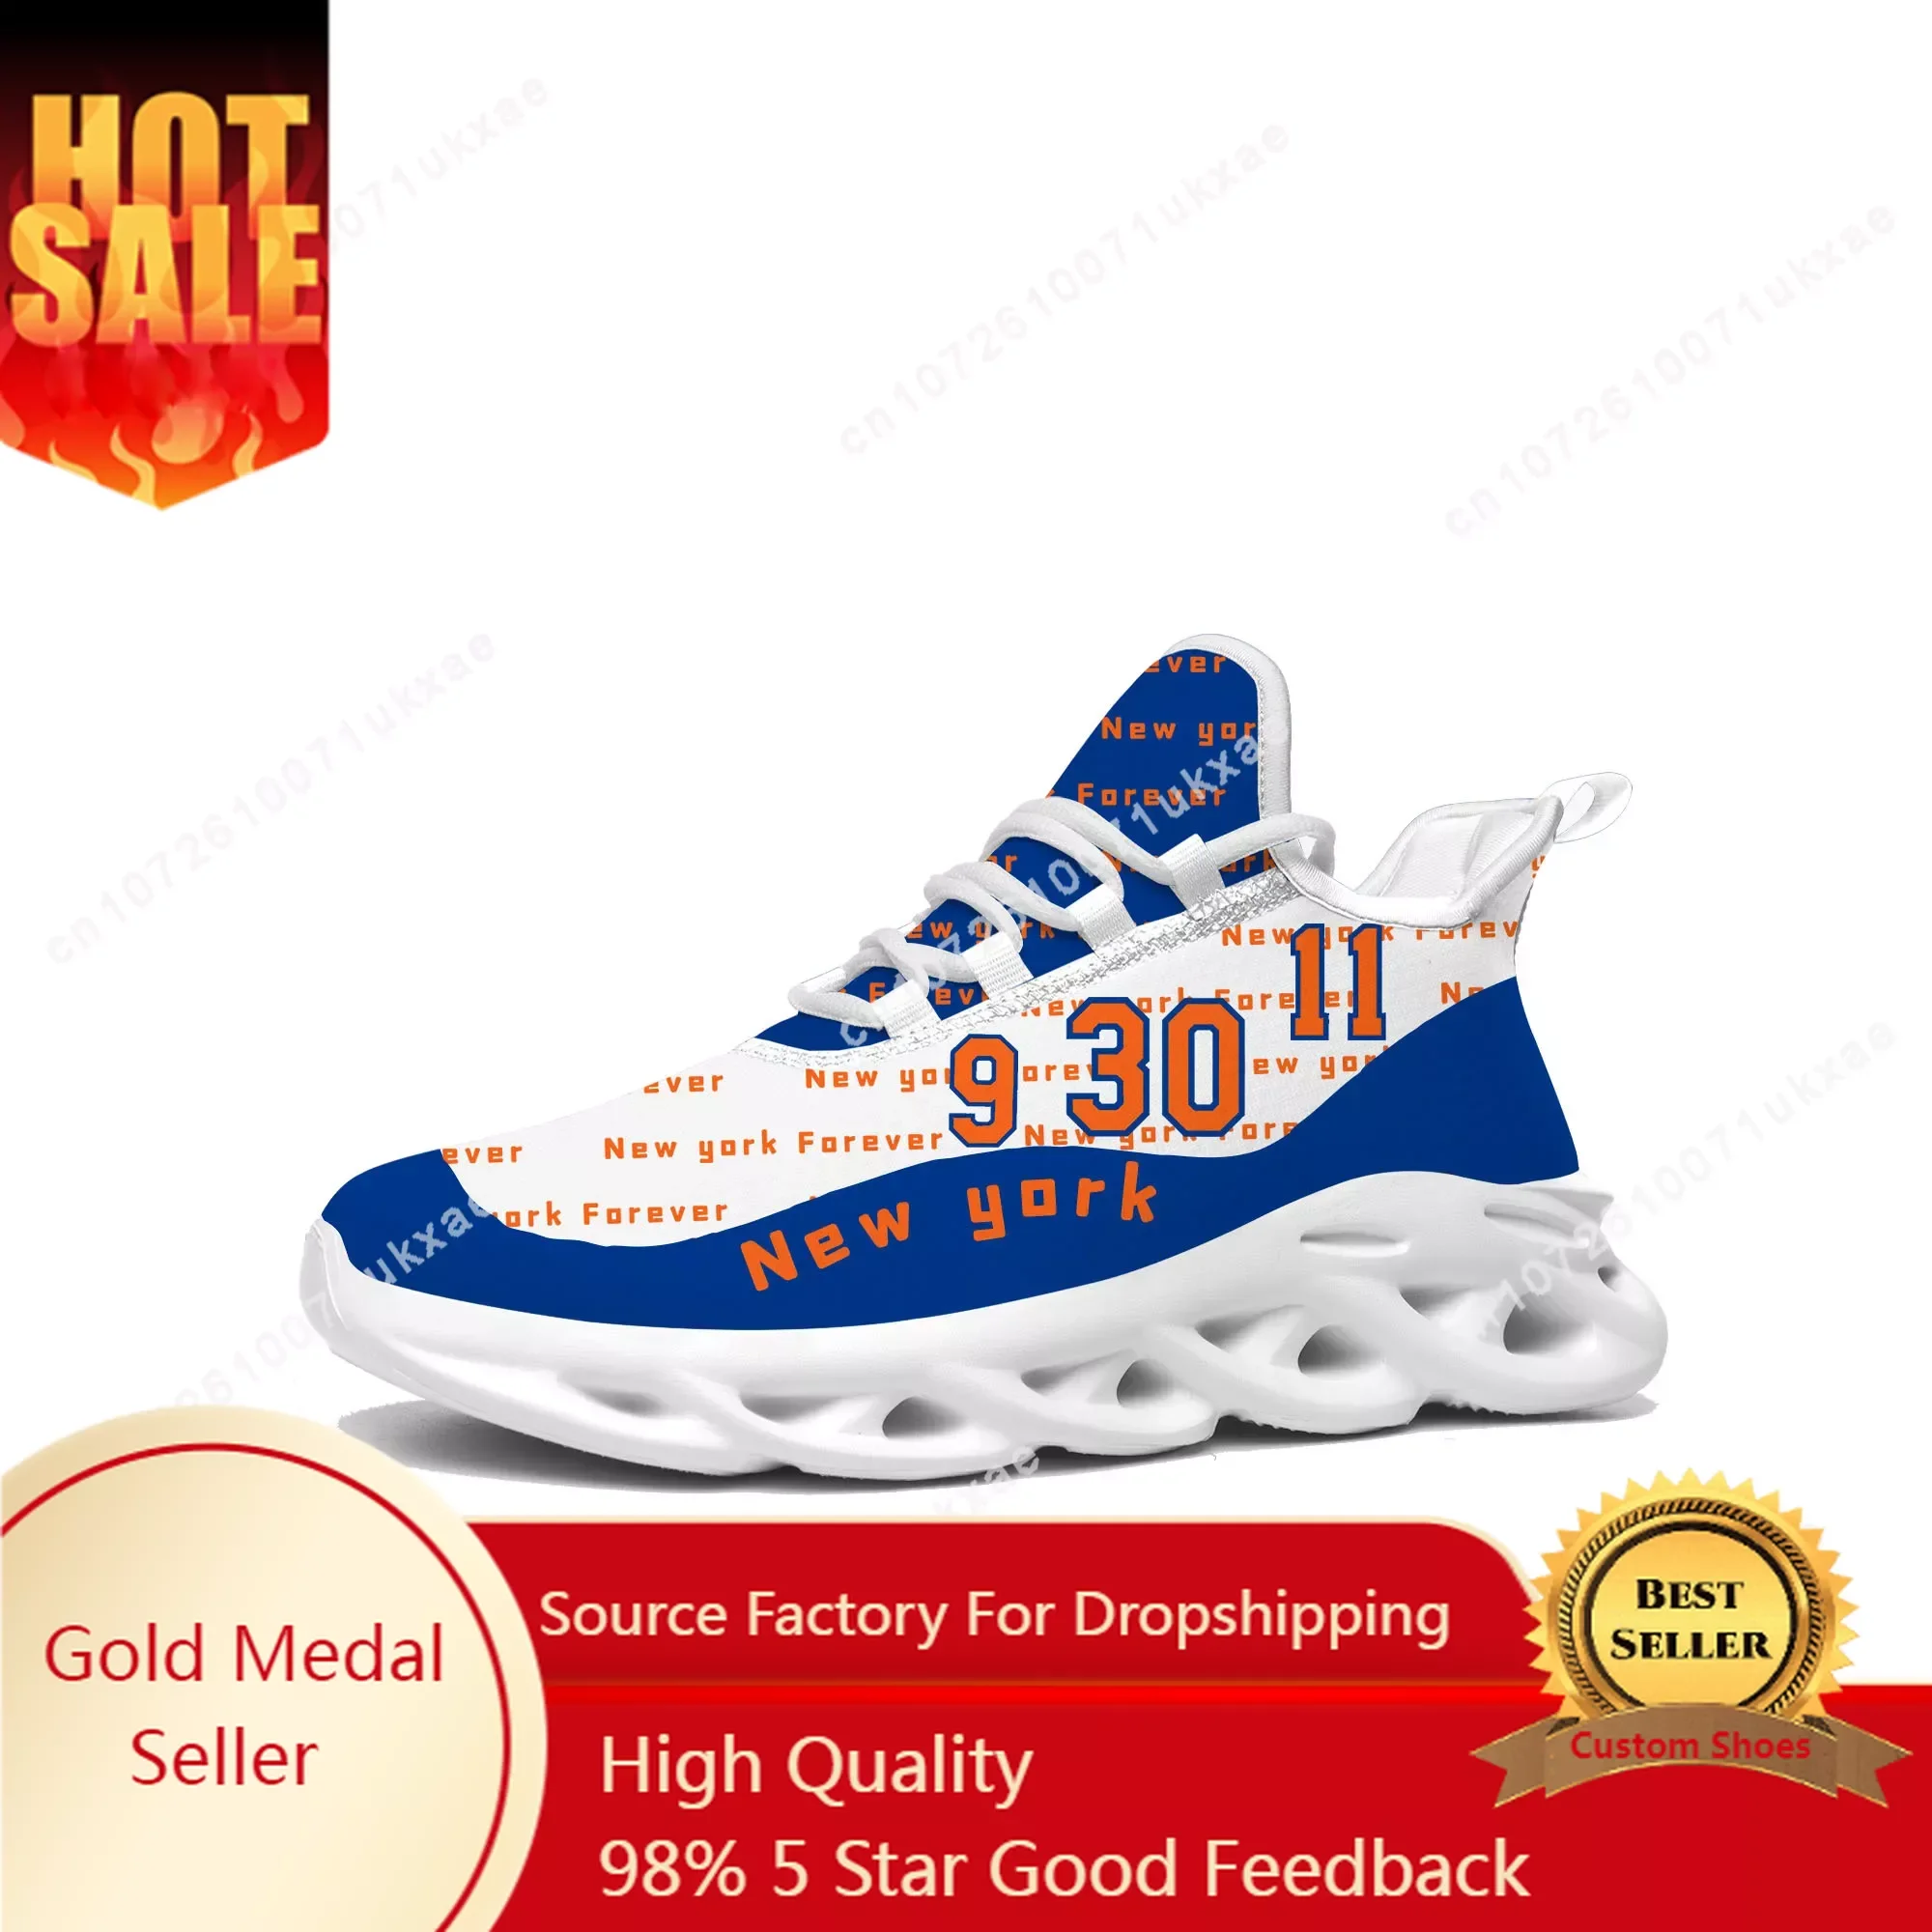 

New york Number 30 11 9 new york forever Flats Sneakers Mens Womens Sports Running Shoes High Quality Sneaker customization Shoe